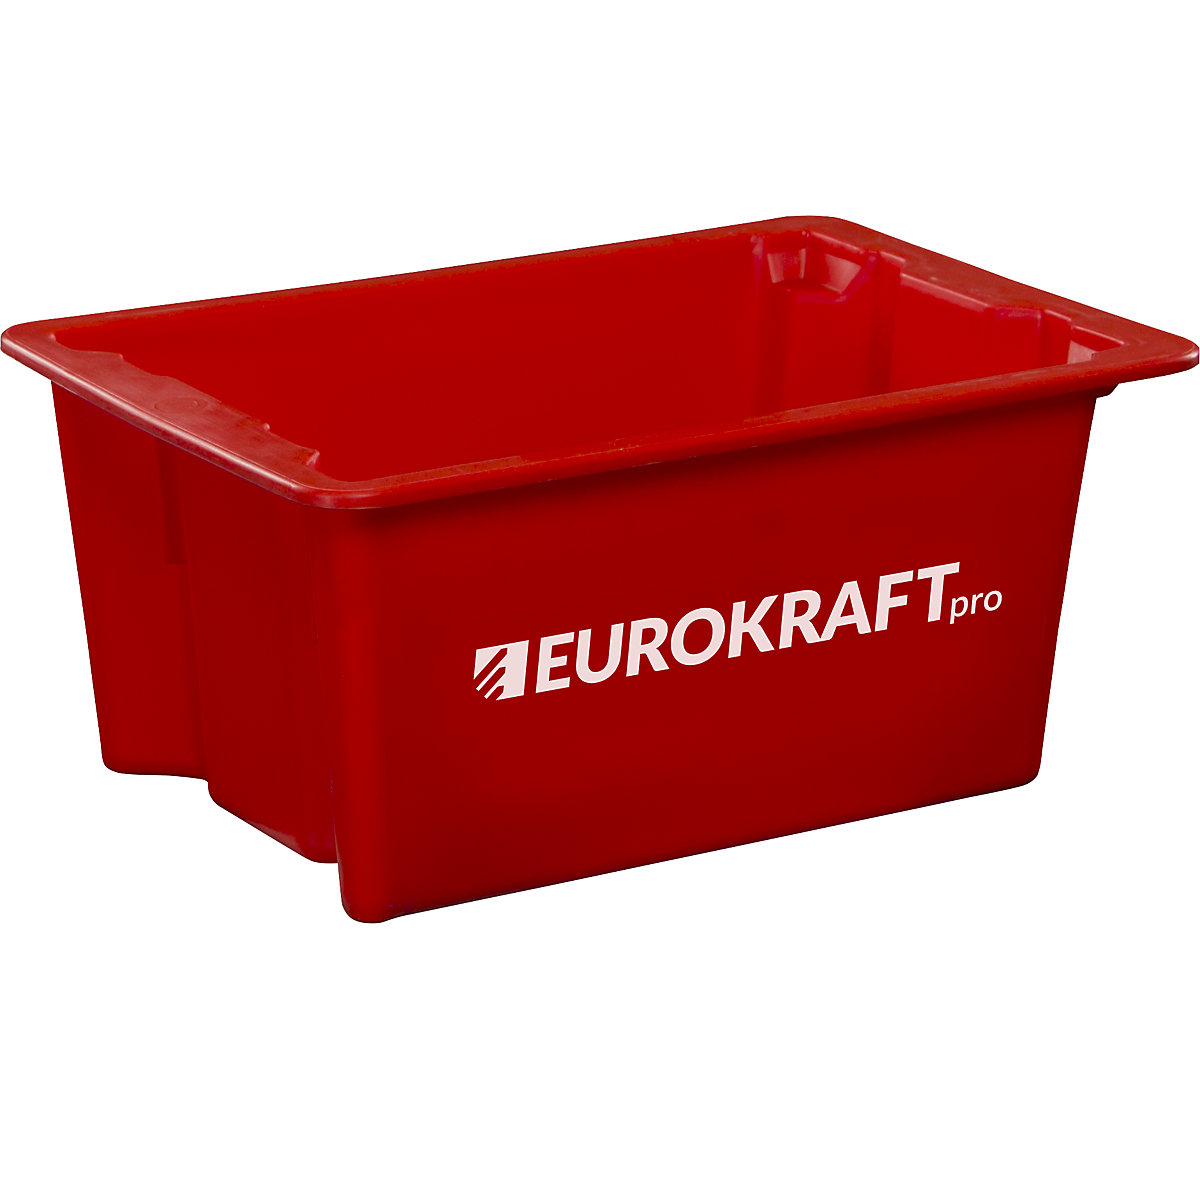 EUROKRAFTpro – Stack/nest container made of polypropylene suitable for foodstuffs, 6 l capacity, pack of 4, solid walls and base, red